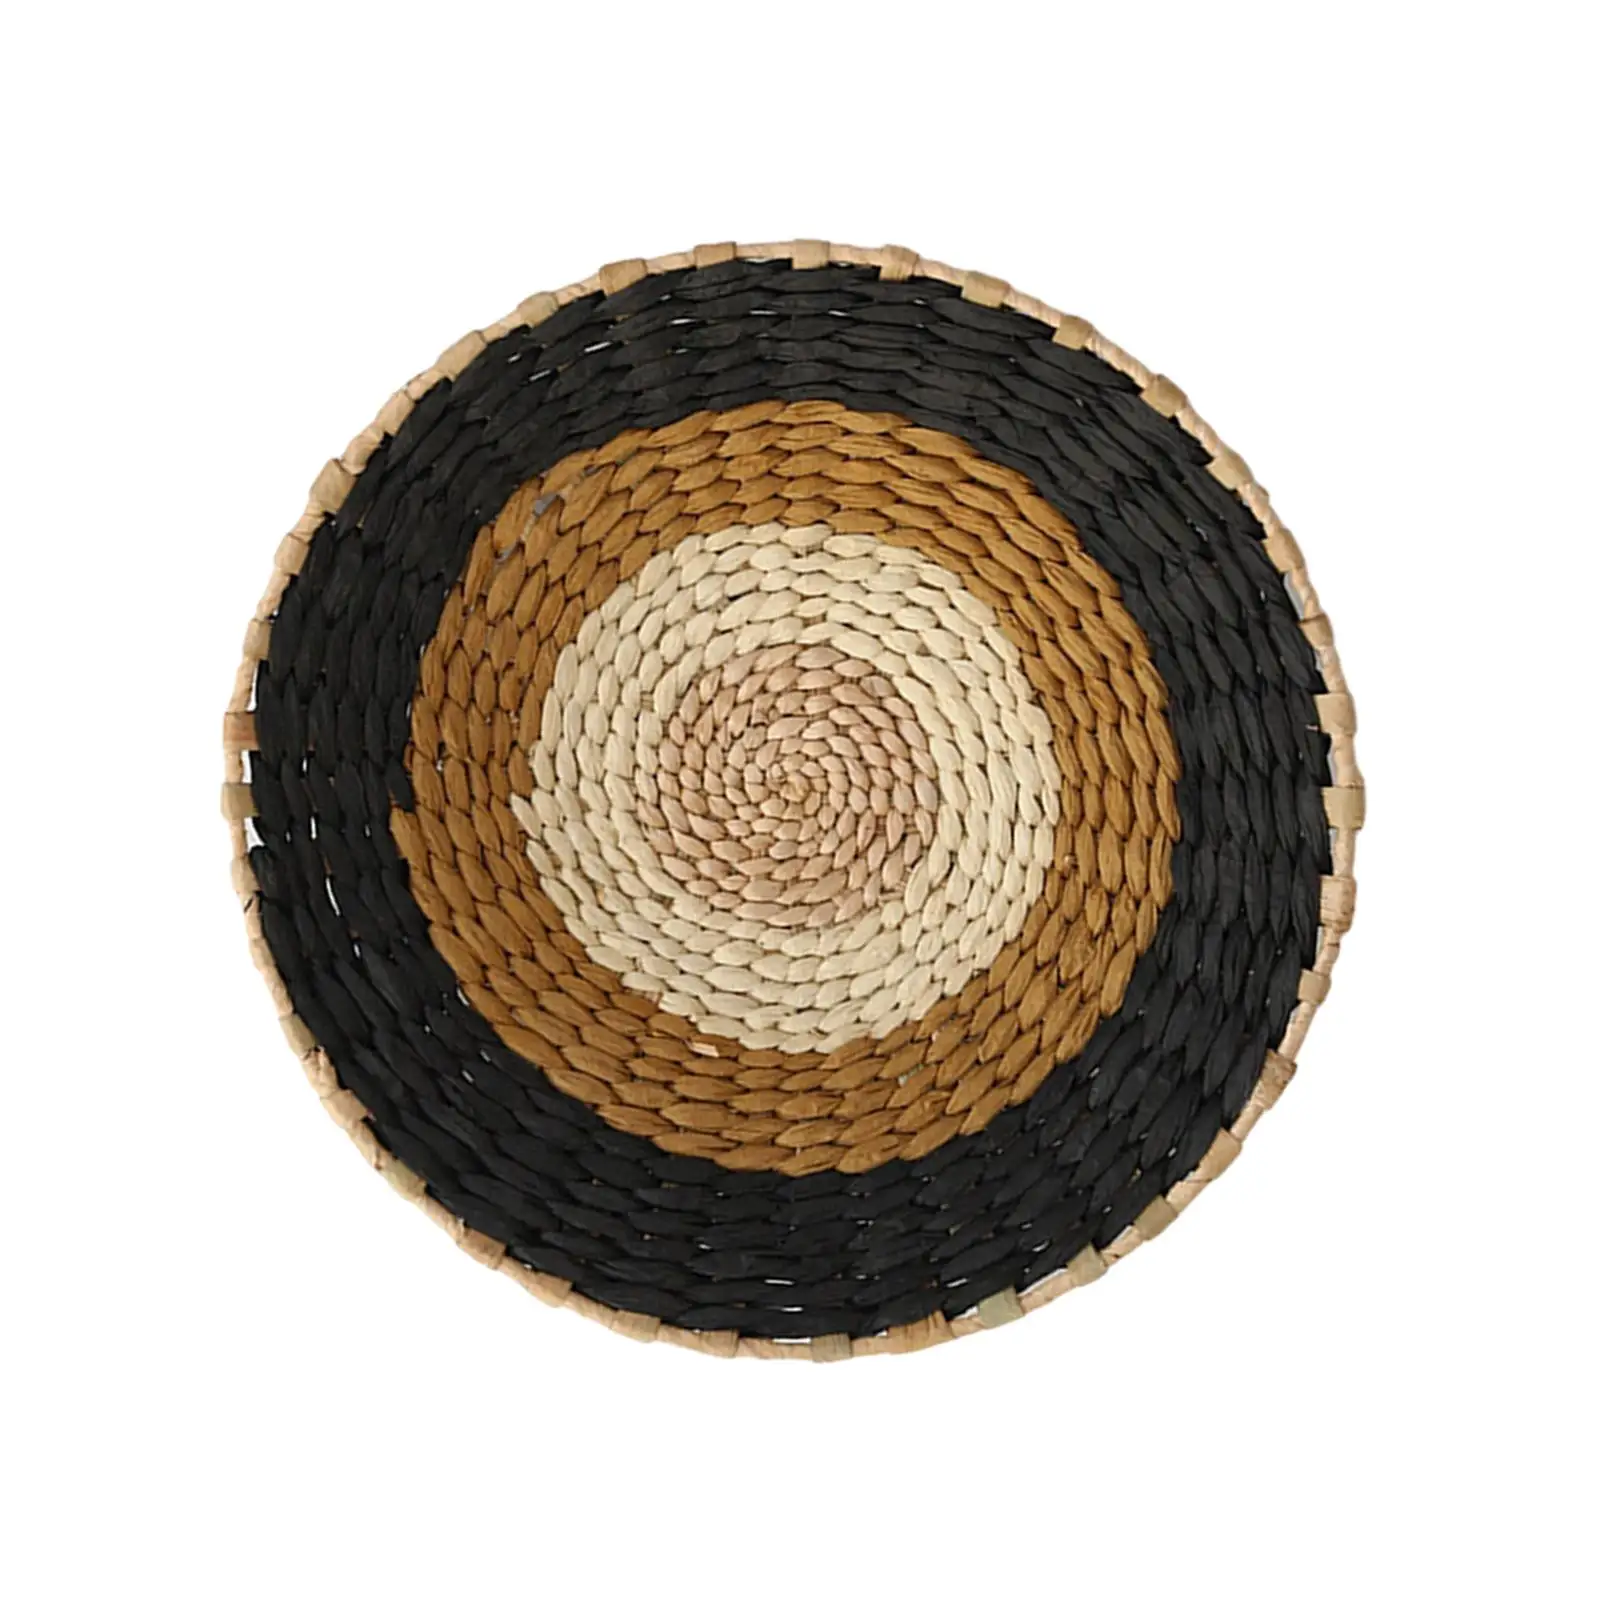 Pendant Wall Decor Grass Pastoral Rustic Weave Pattern Decoration for Porch Wall